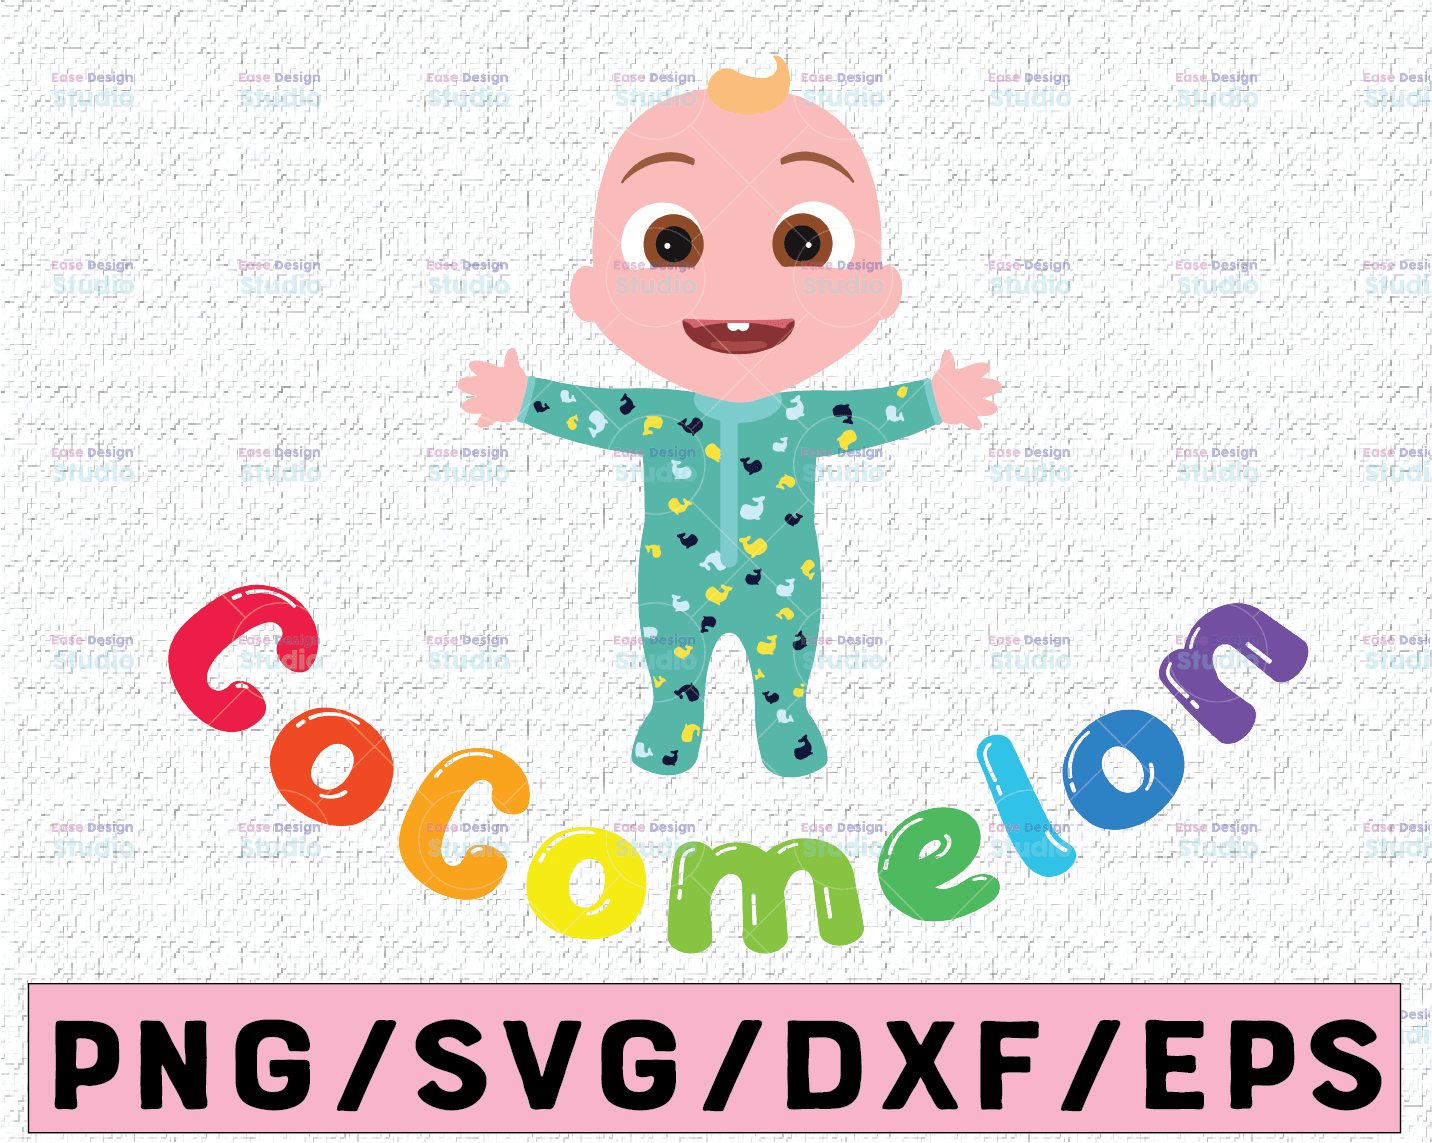 Download Cocomelon Jj Svg Coco Melon Svg Cocomelon Logo Svg Cocomelon Birthday Svg Watermelon Birthday Trending Birthday Svg Png Dxf Vectorency